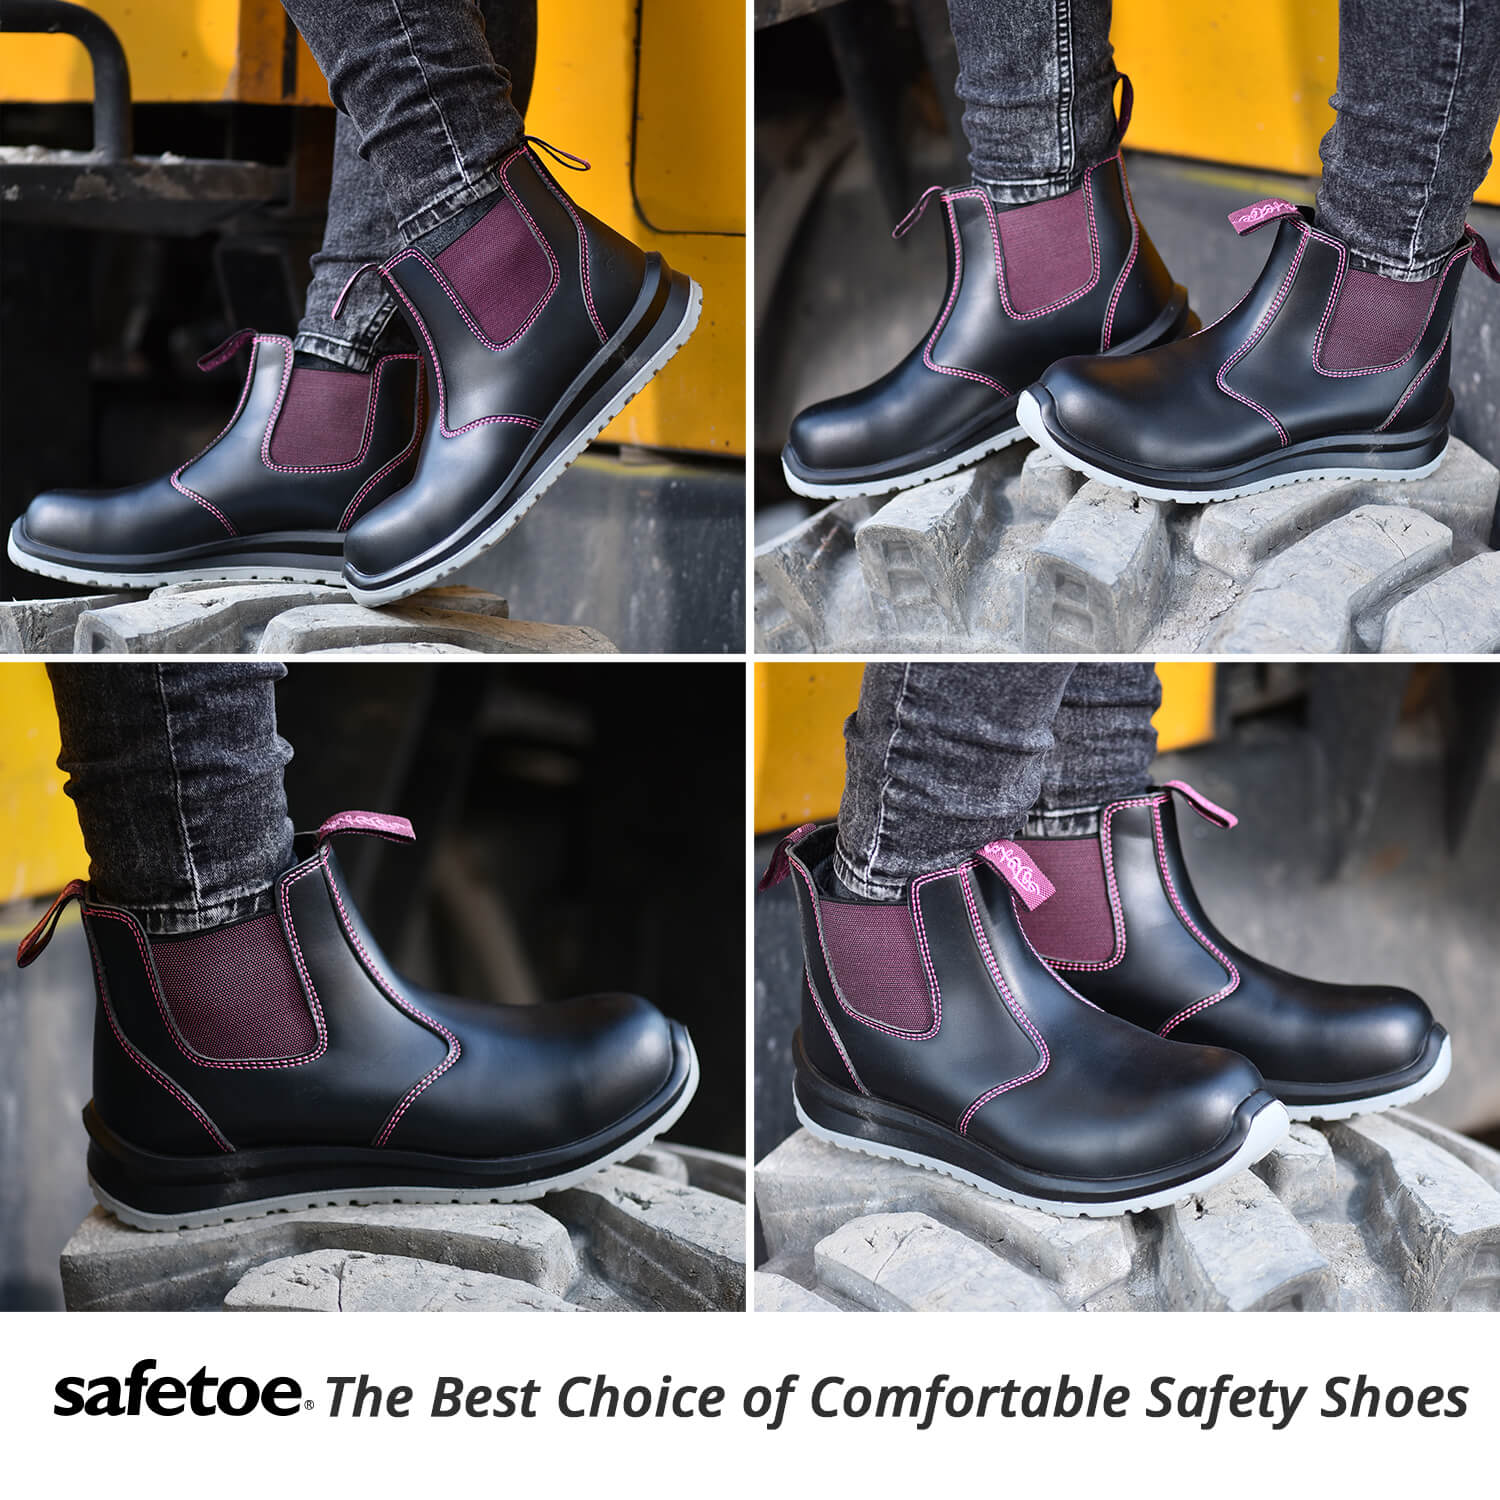 Safetoe Lightweight & Comfortable Safety Work Boots for Women